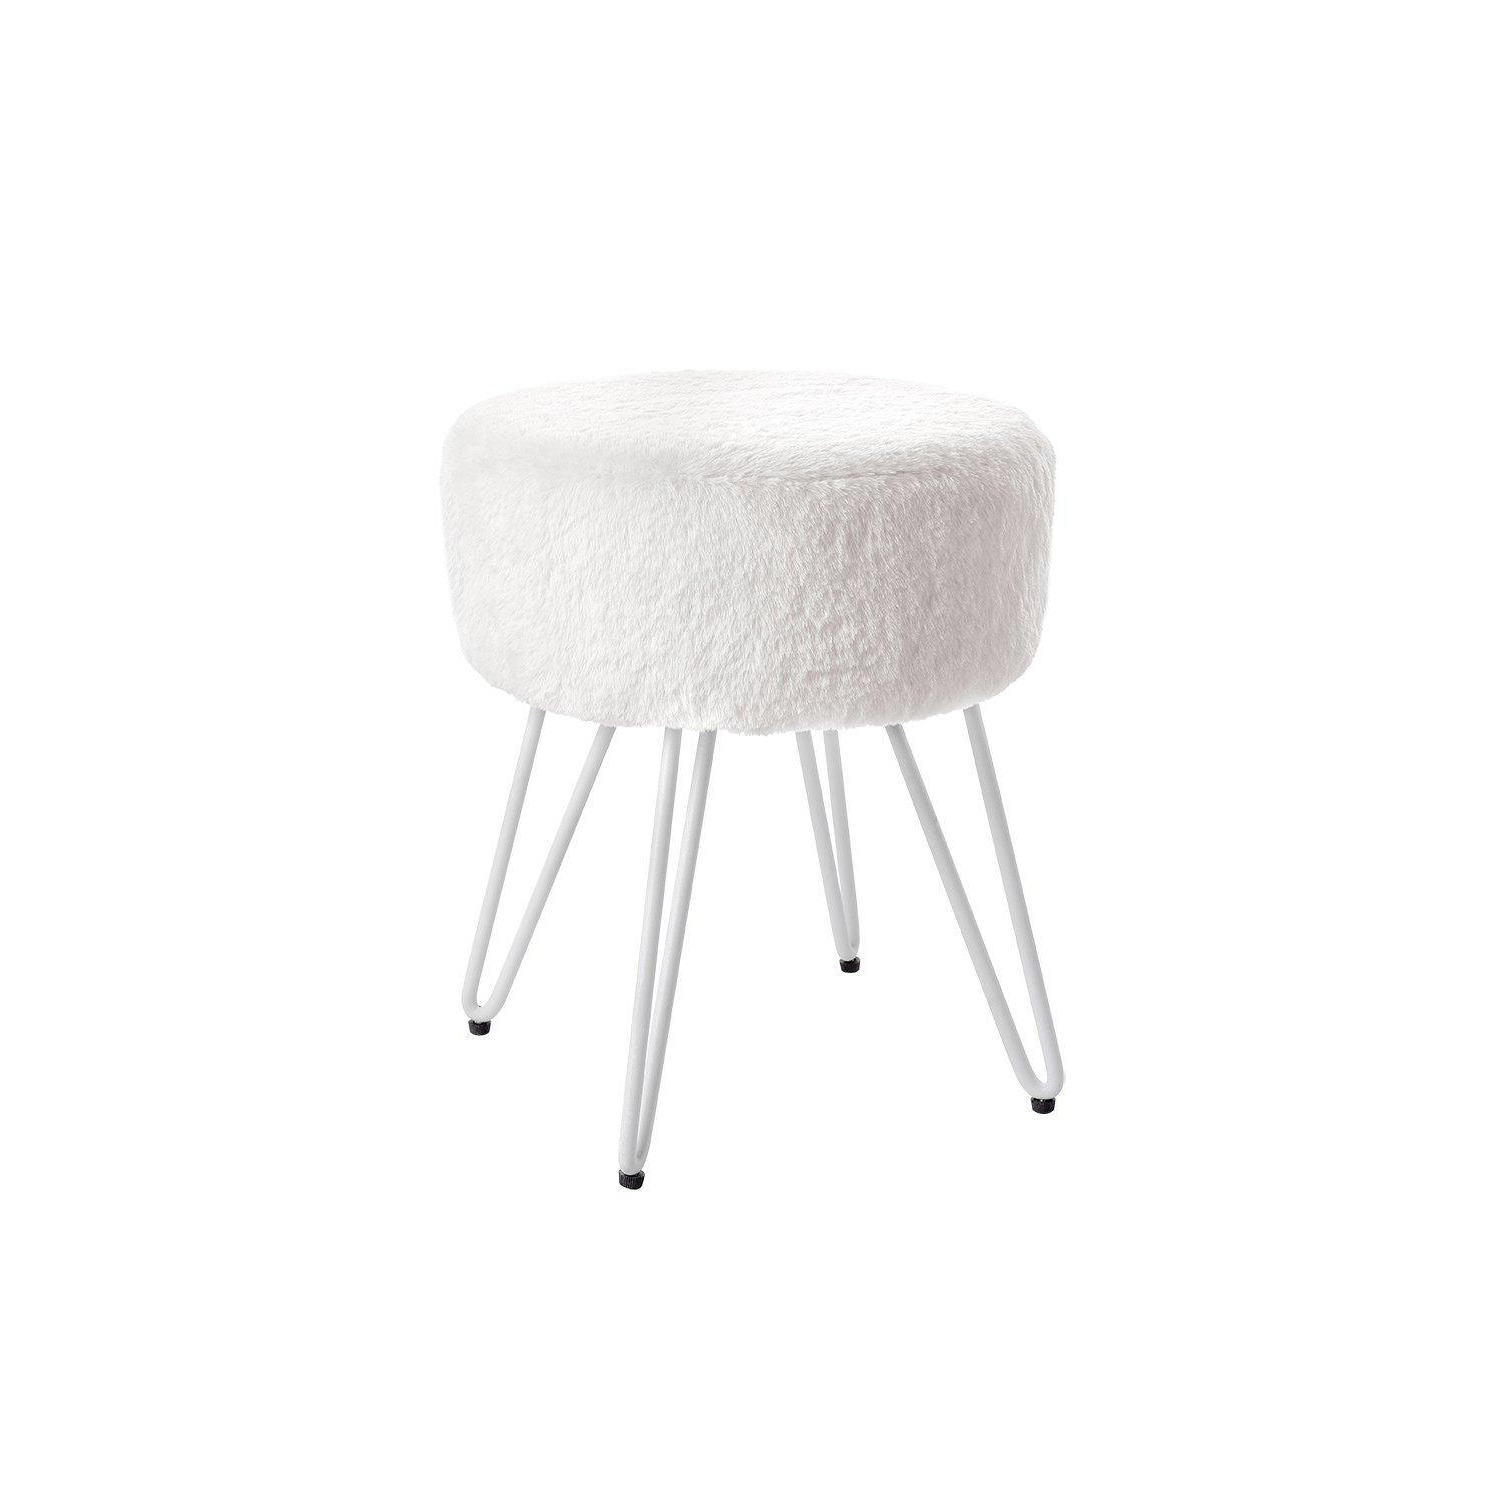 Soft Fluffy White Low Chair Dressing Footstool with Metal Leg - image 1